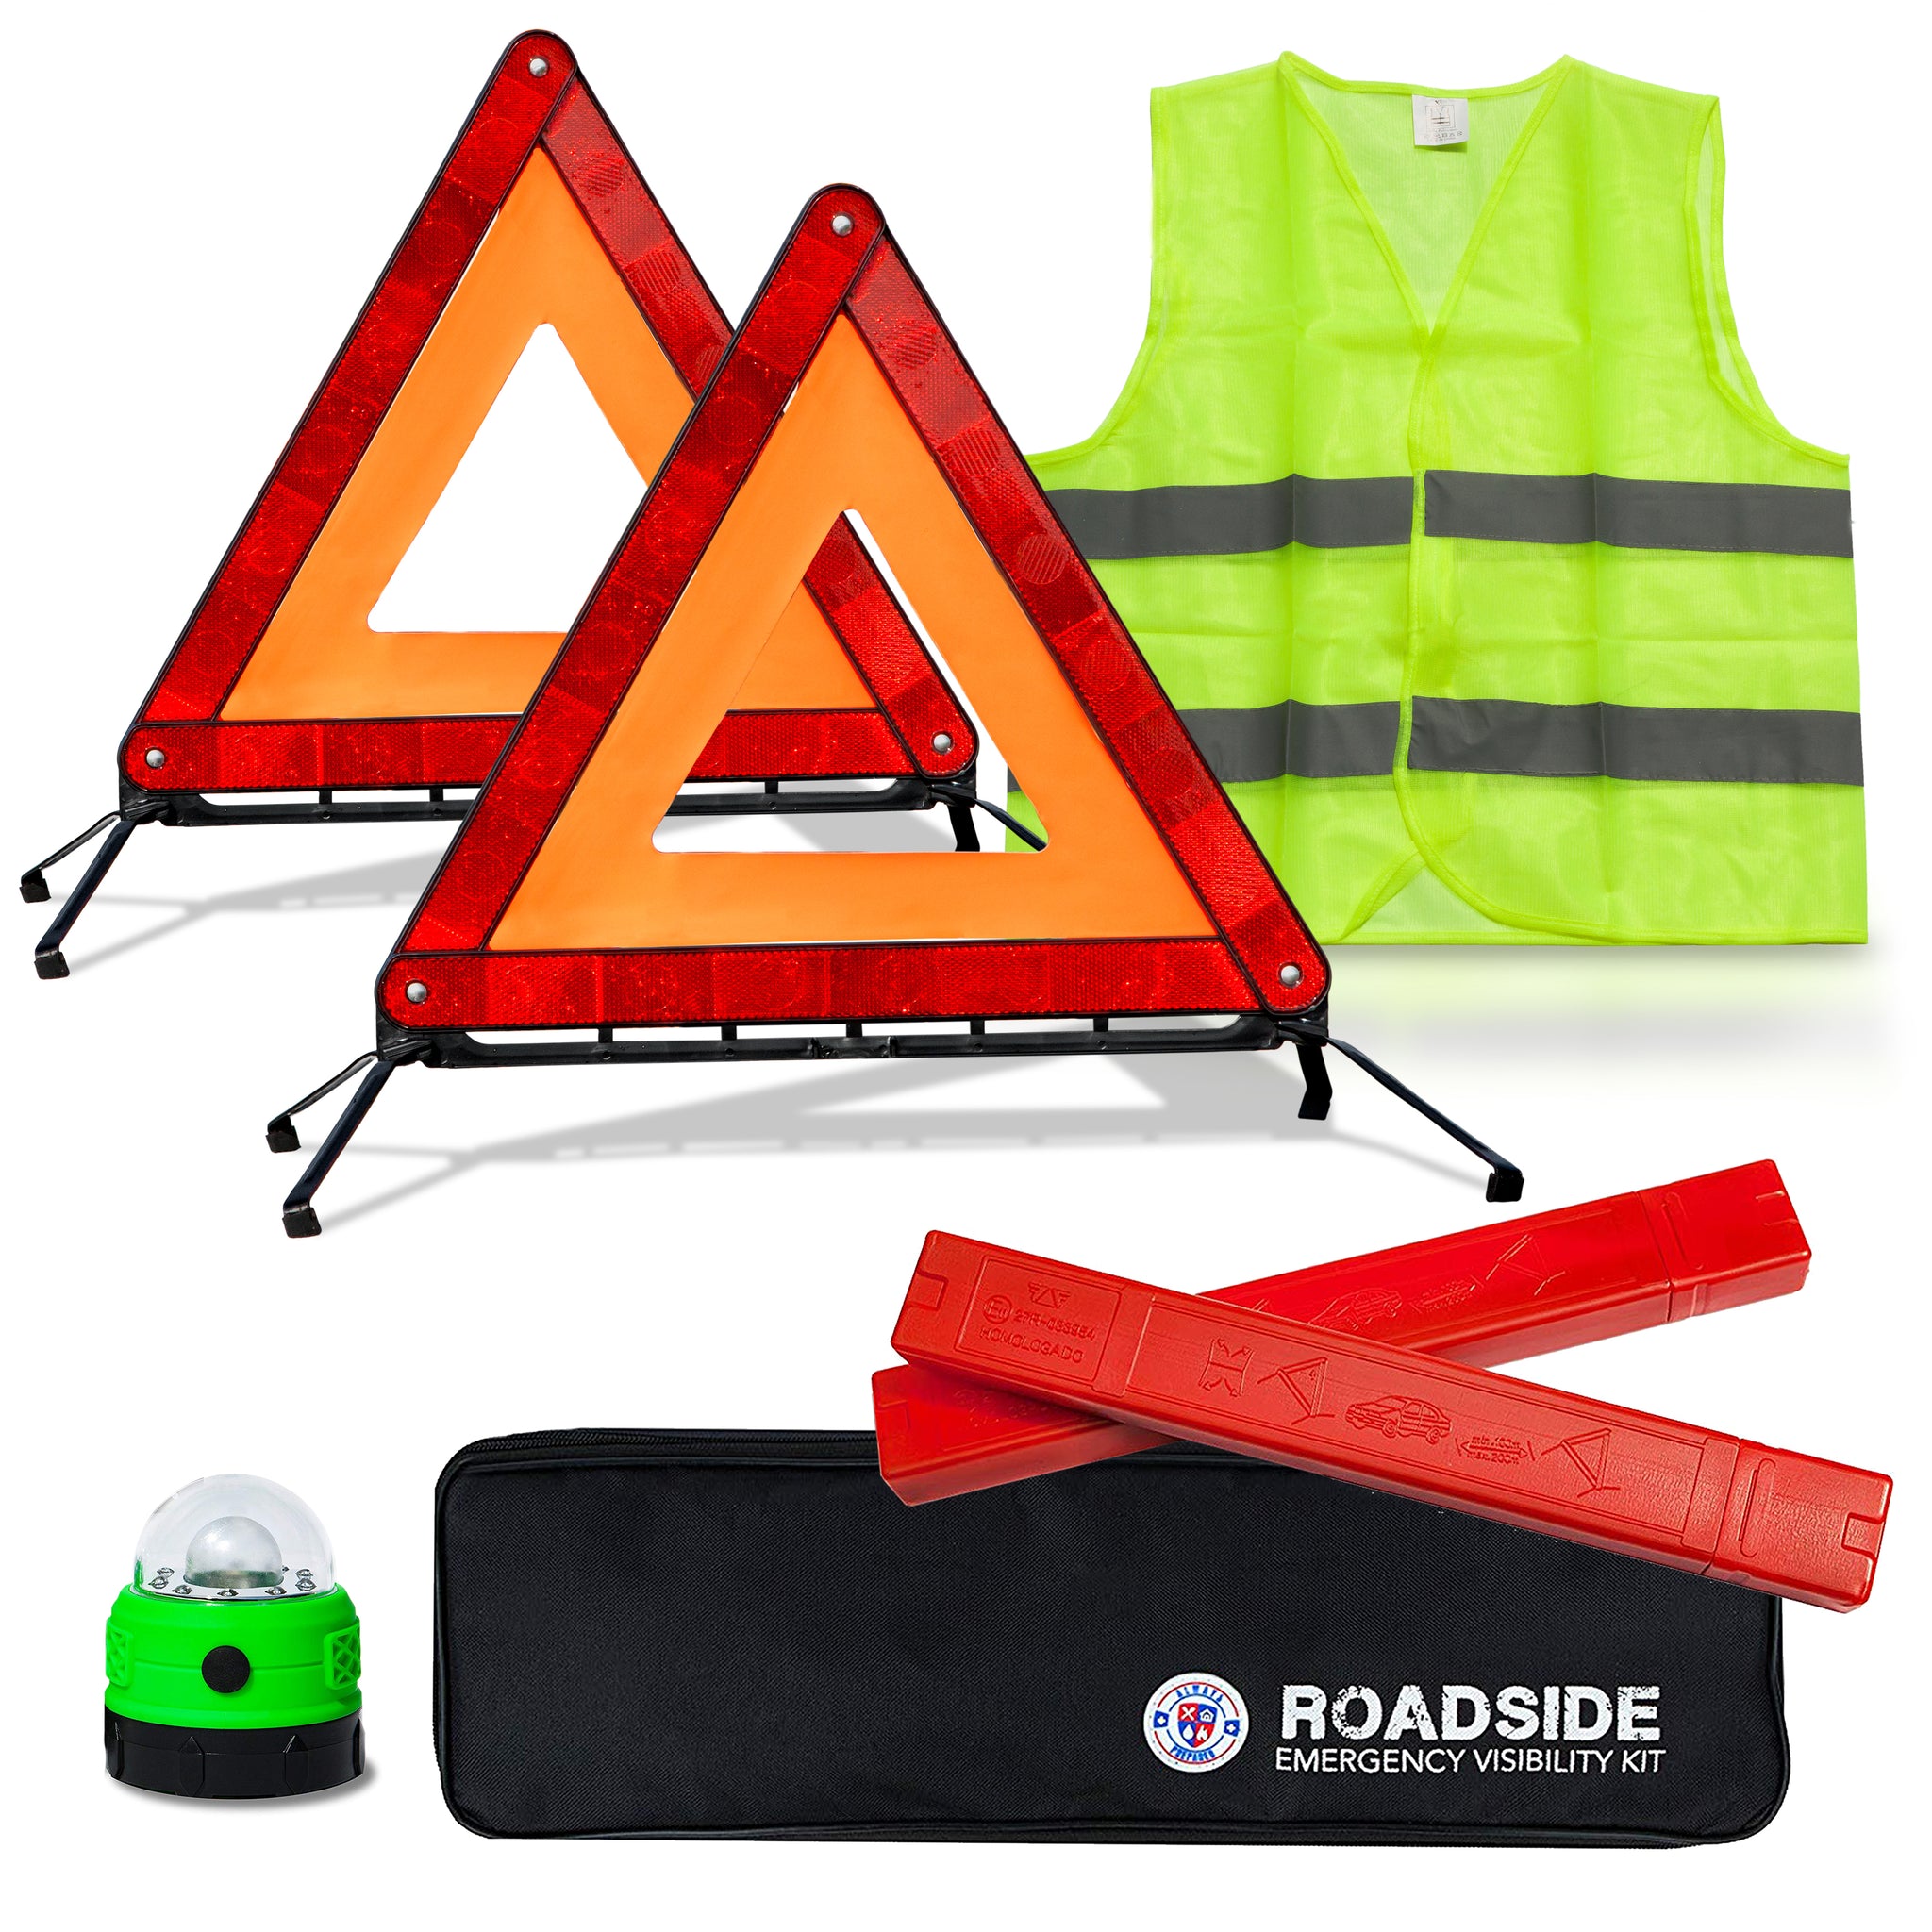 4-Pack 15.5 Reflective Pop Up Cones - Safety Gear for Roadside Visibility